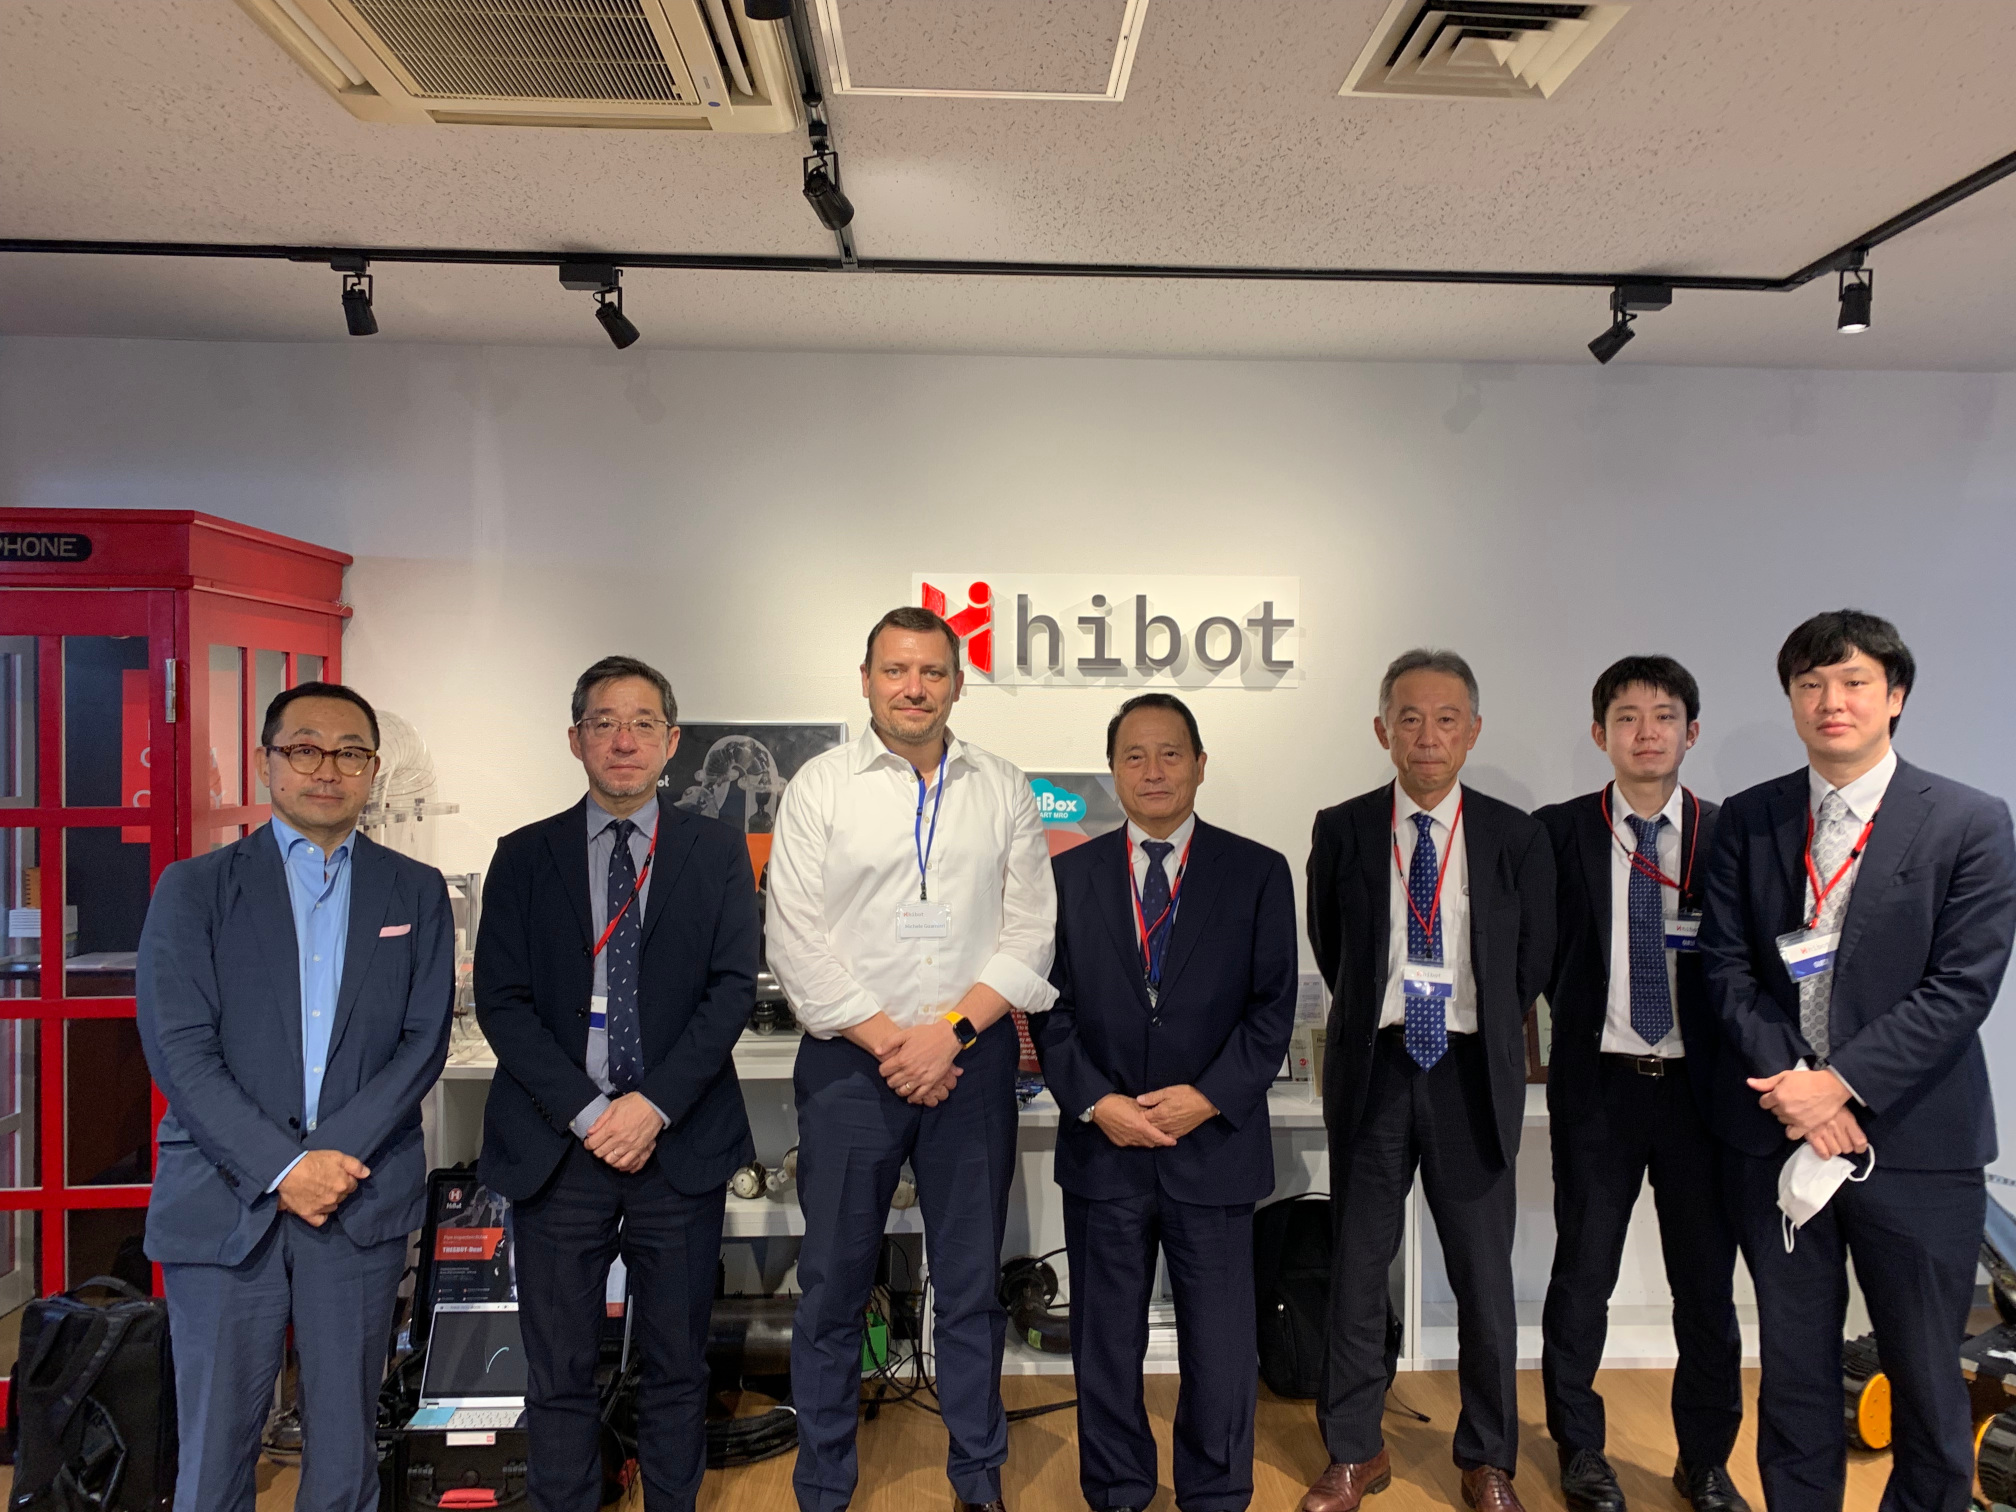 Hibot receives visit from Harmonic Drive president and management toward future collaborations